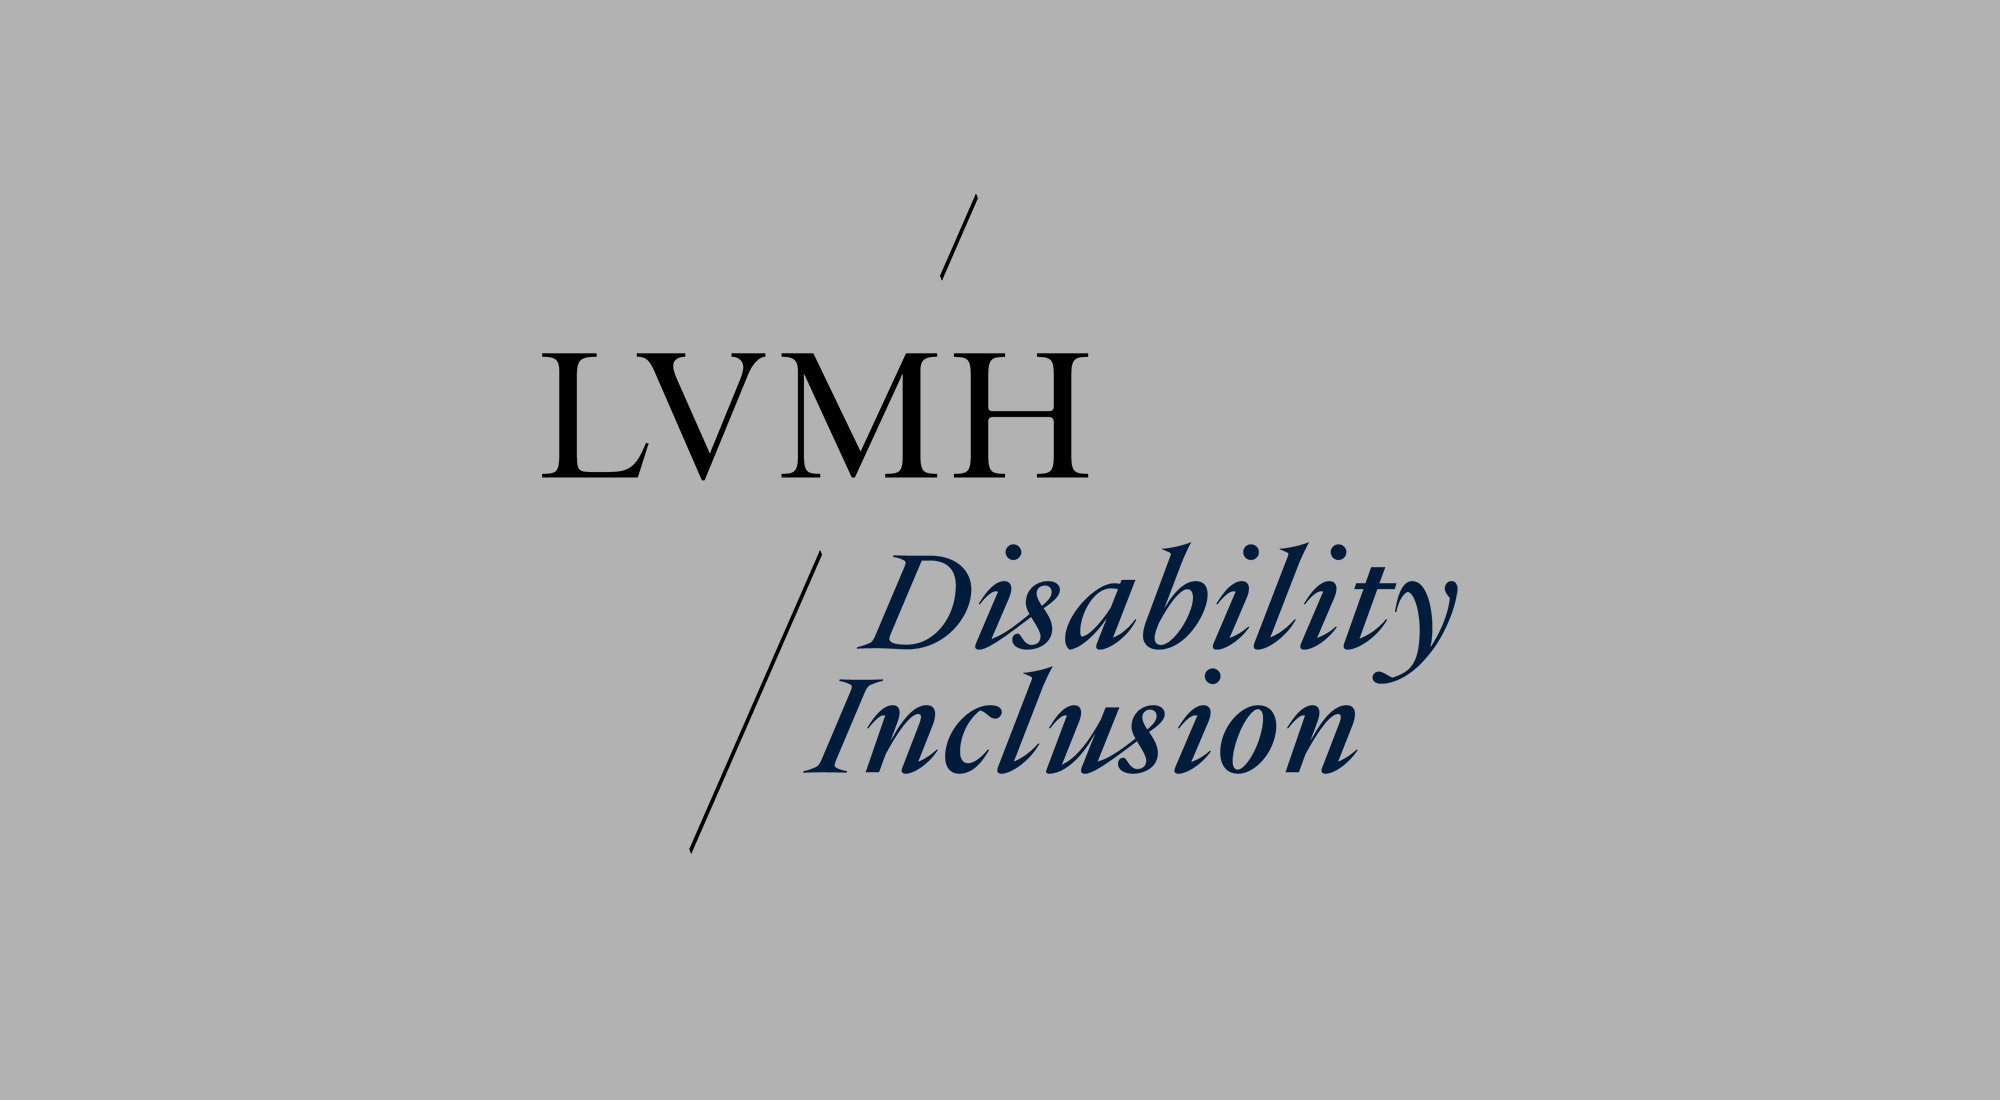 LVMH's Commitment to Diversity & Inclusion on Vimeo